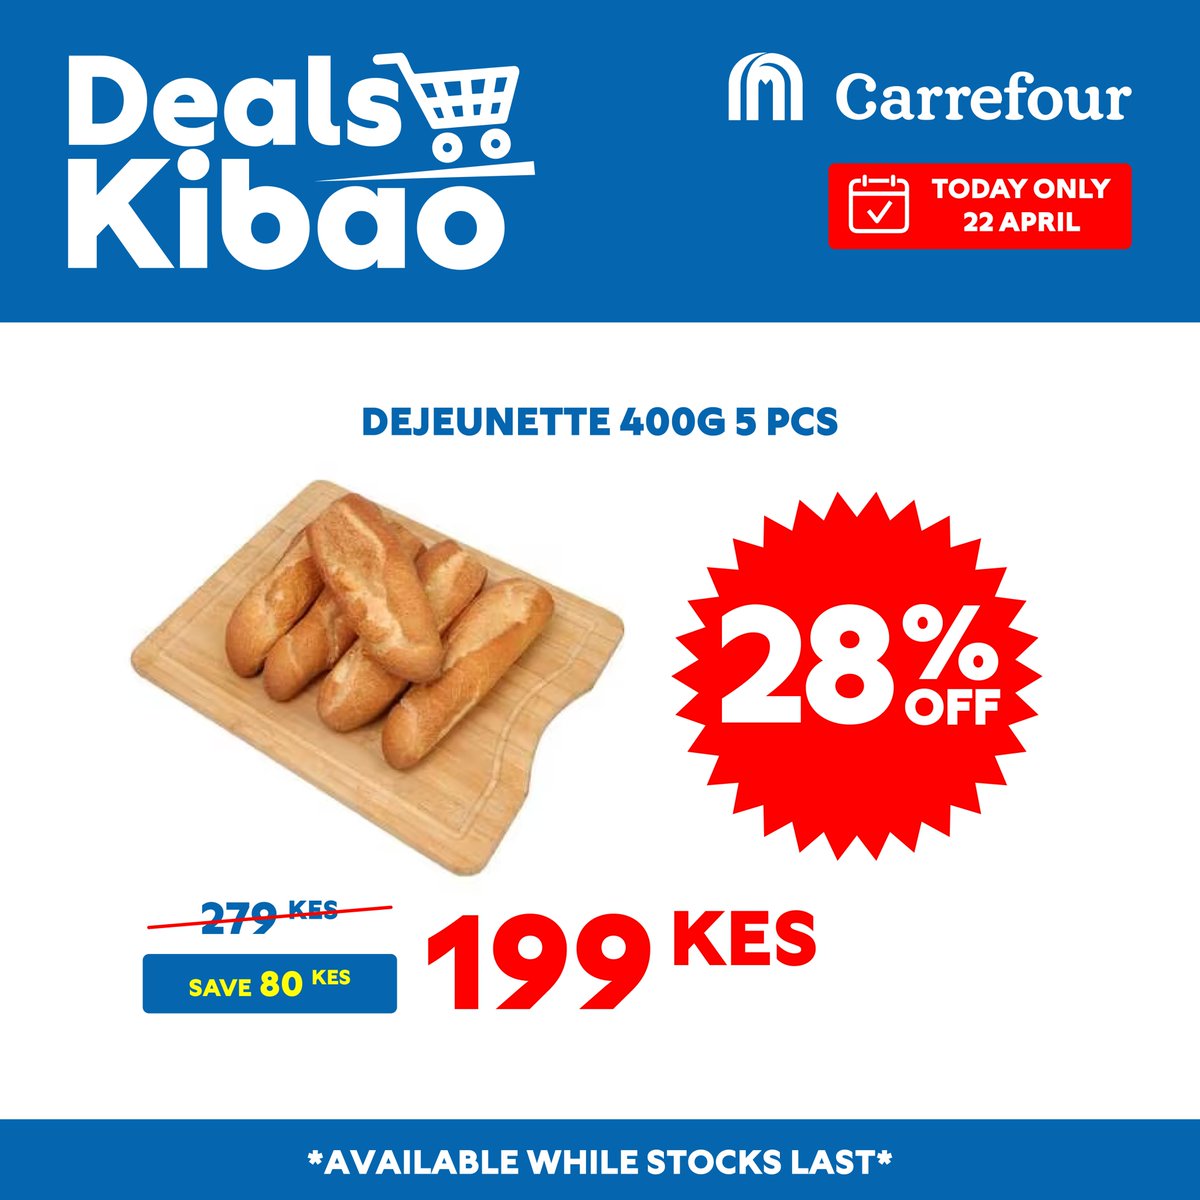 Indulge in the deliciousness of Dejeunette! 🍽️ Enjoy a mouthwatering 28% off on the Dejeunette 400g 5pcs pack. Hurry, grab this irresistible deal while it lasts! #CarrefourKenya #MoreForYou #GreatMoments @majidalfuttaim